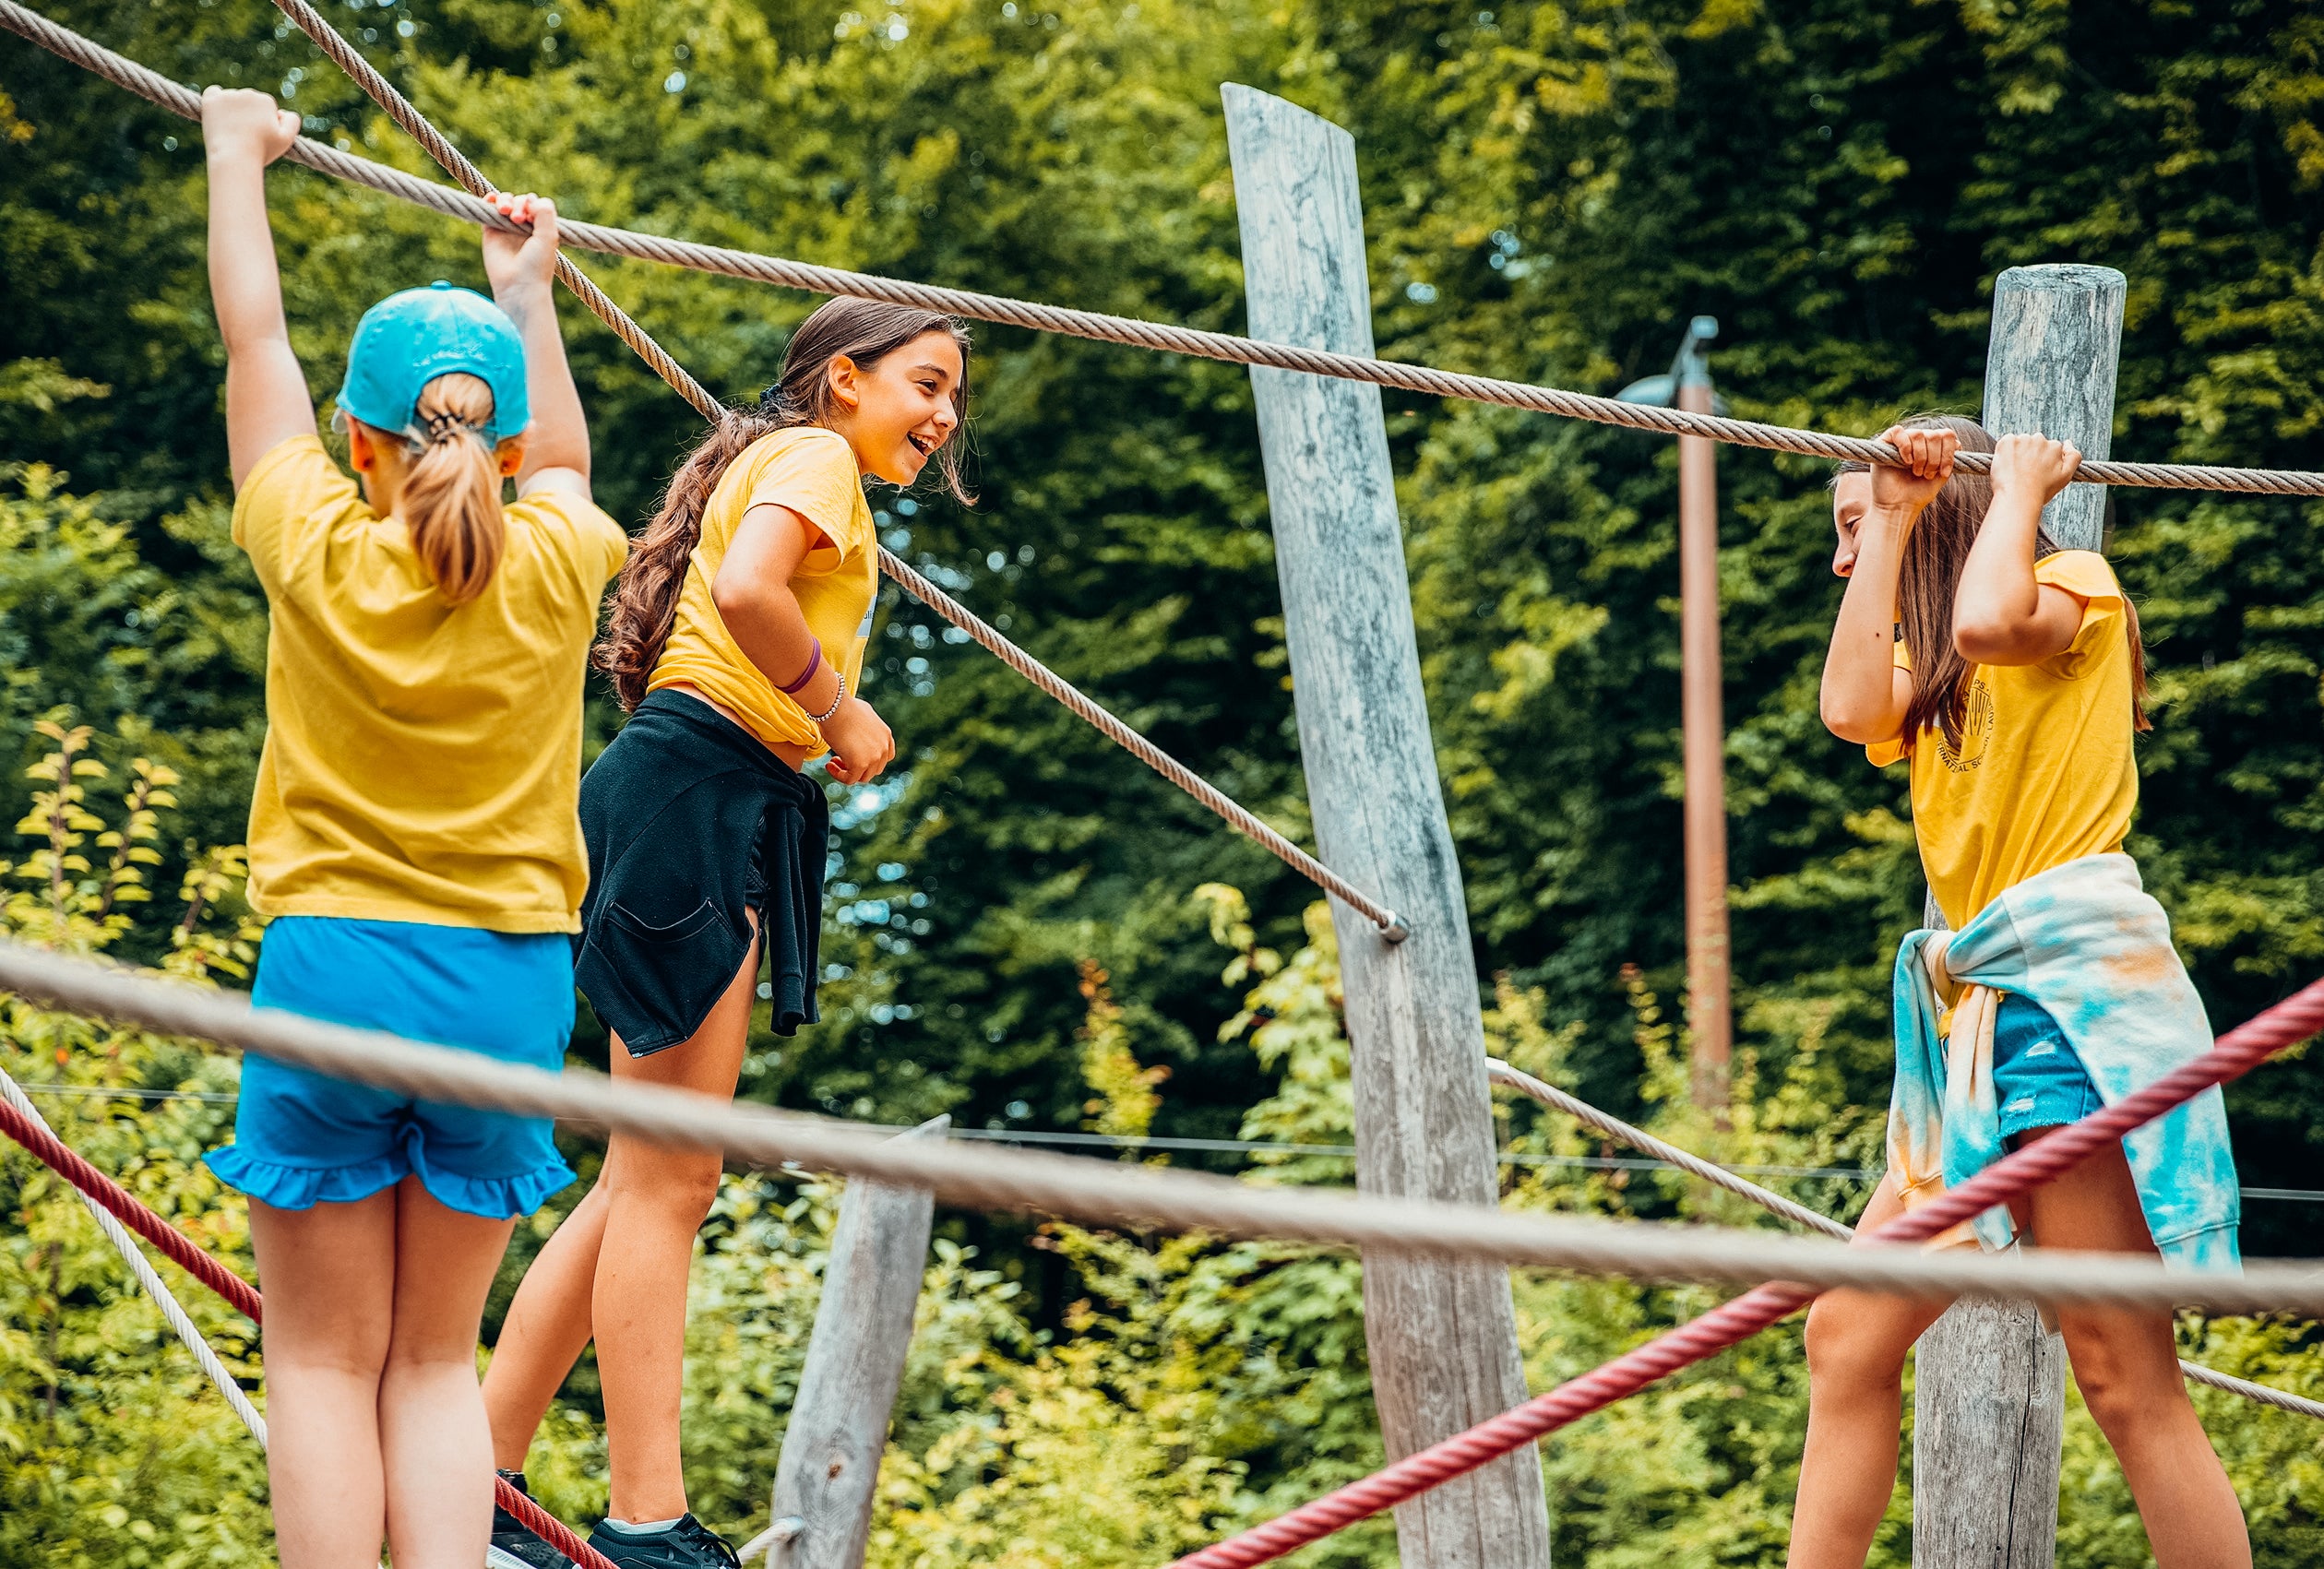 Junior Camp – Multi-activity, 9 to 12 years old